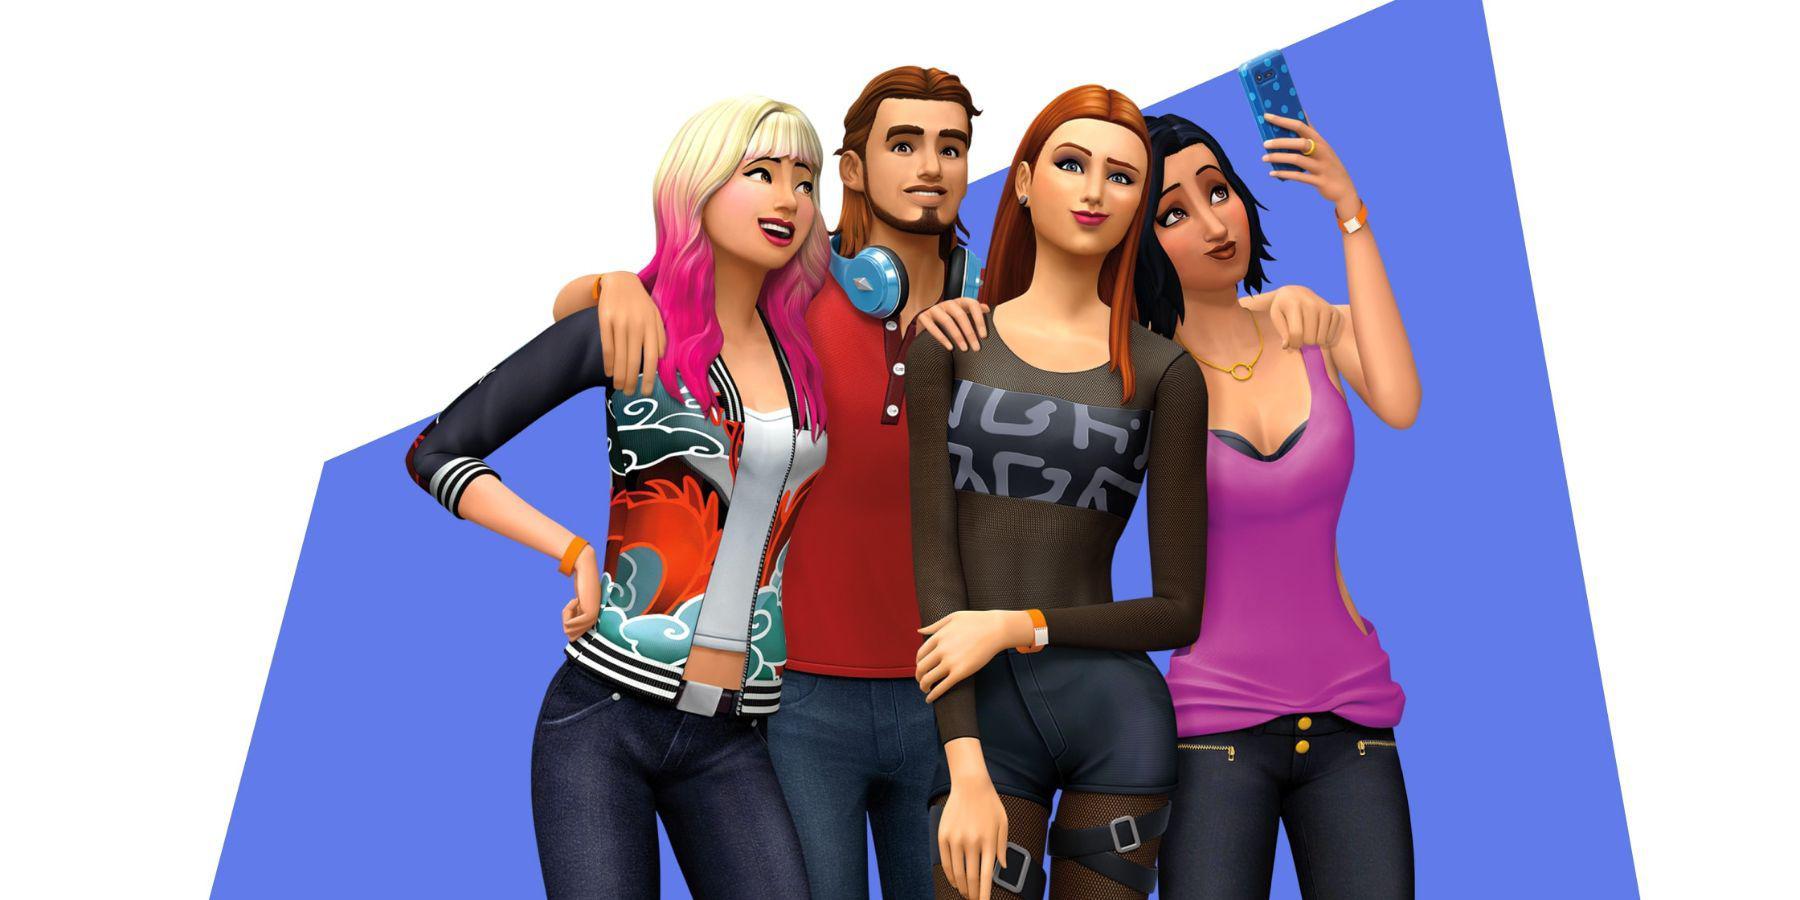 The Sims 4: Get Together Guia Completo